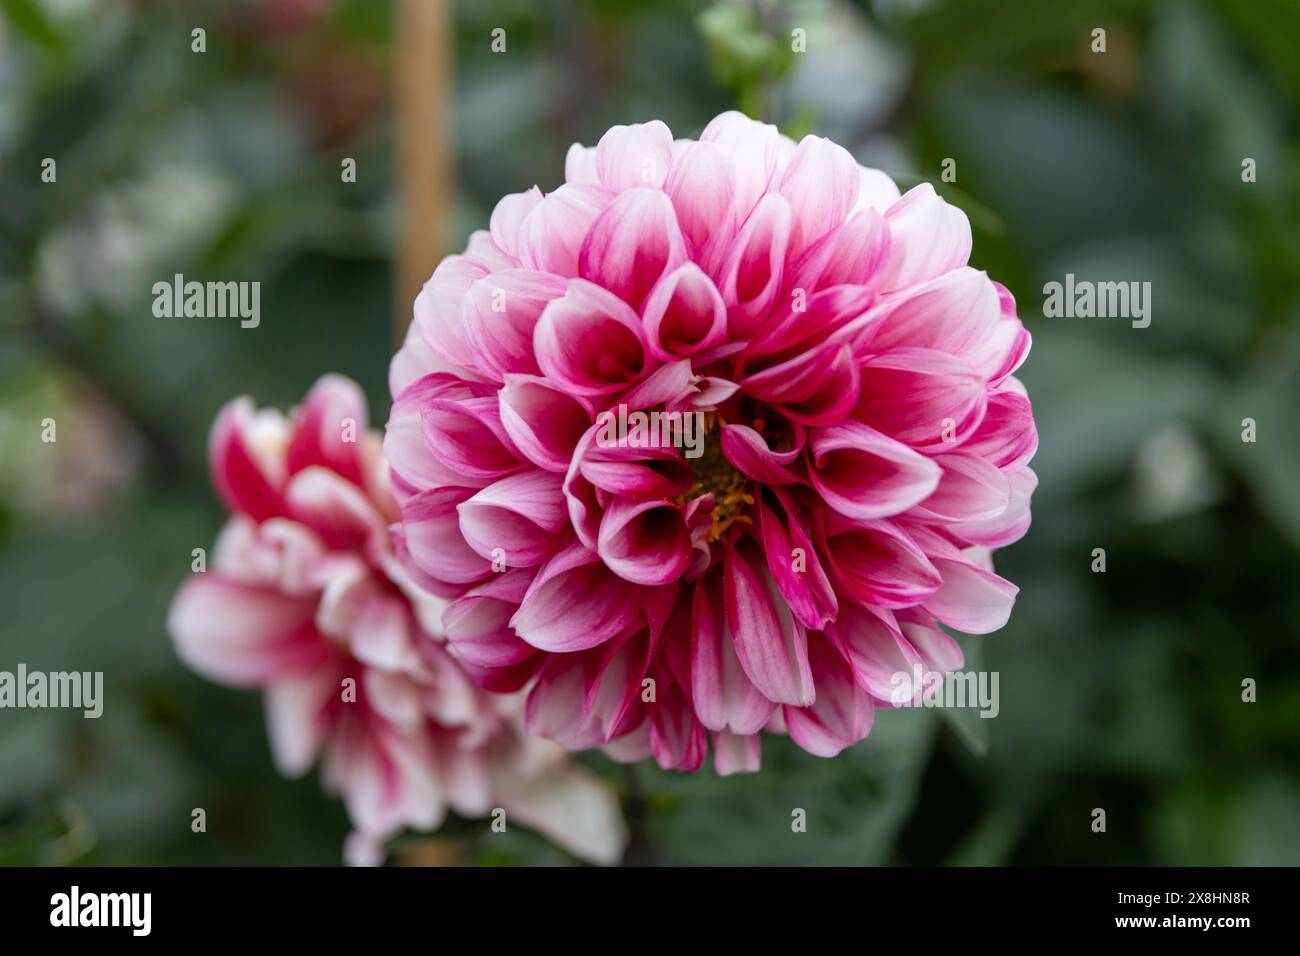 Vibrant pink and white dahlia - close-up - amidst green foliage. Taken in Toronto, Canada. Stock Photo